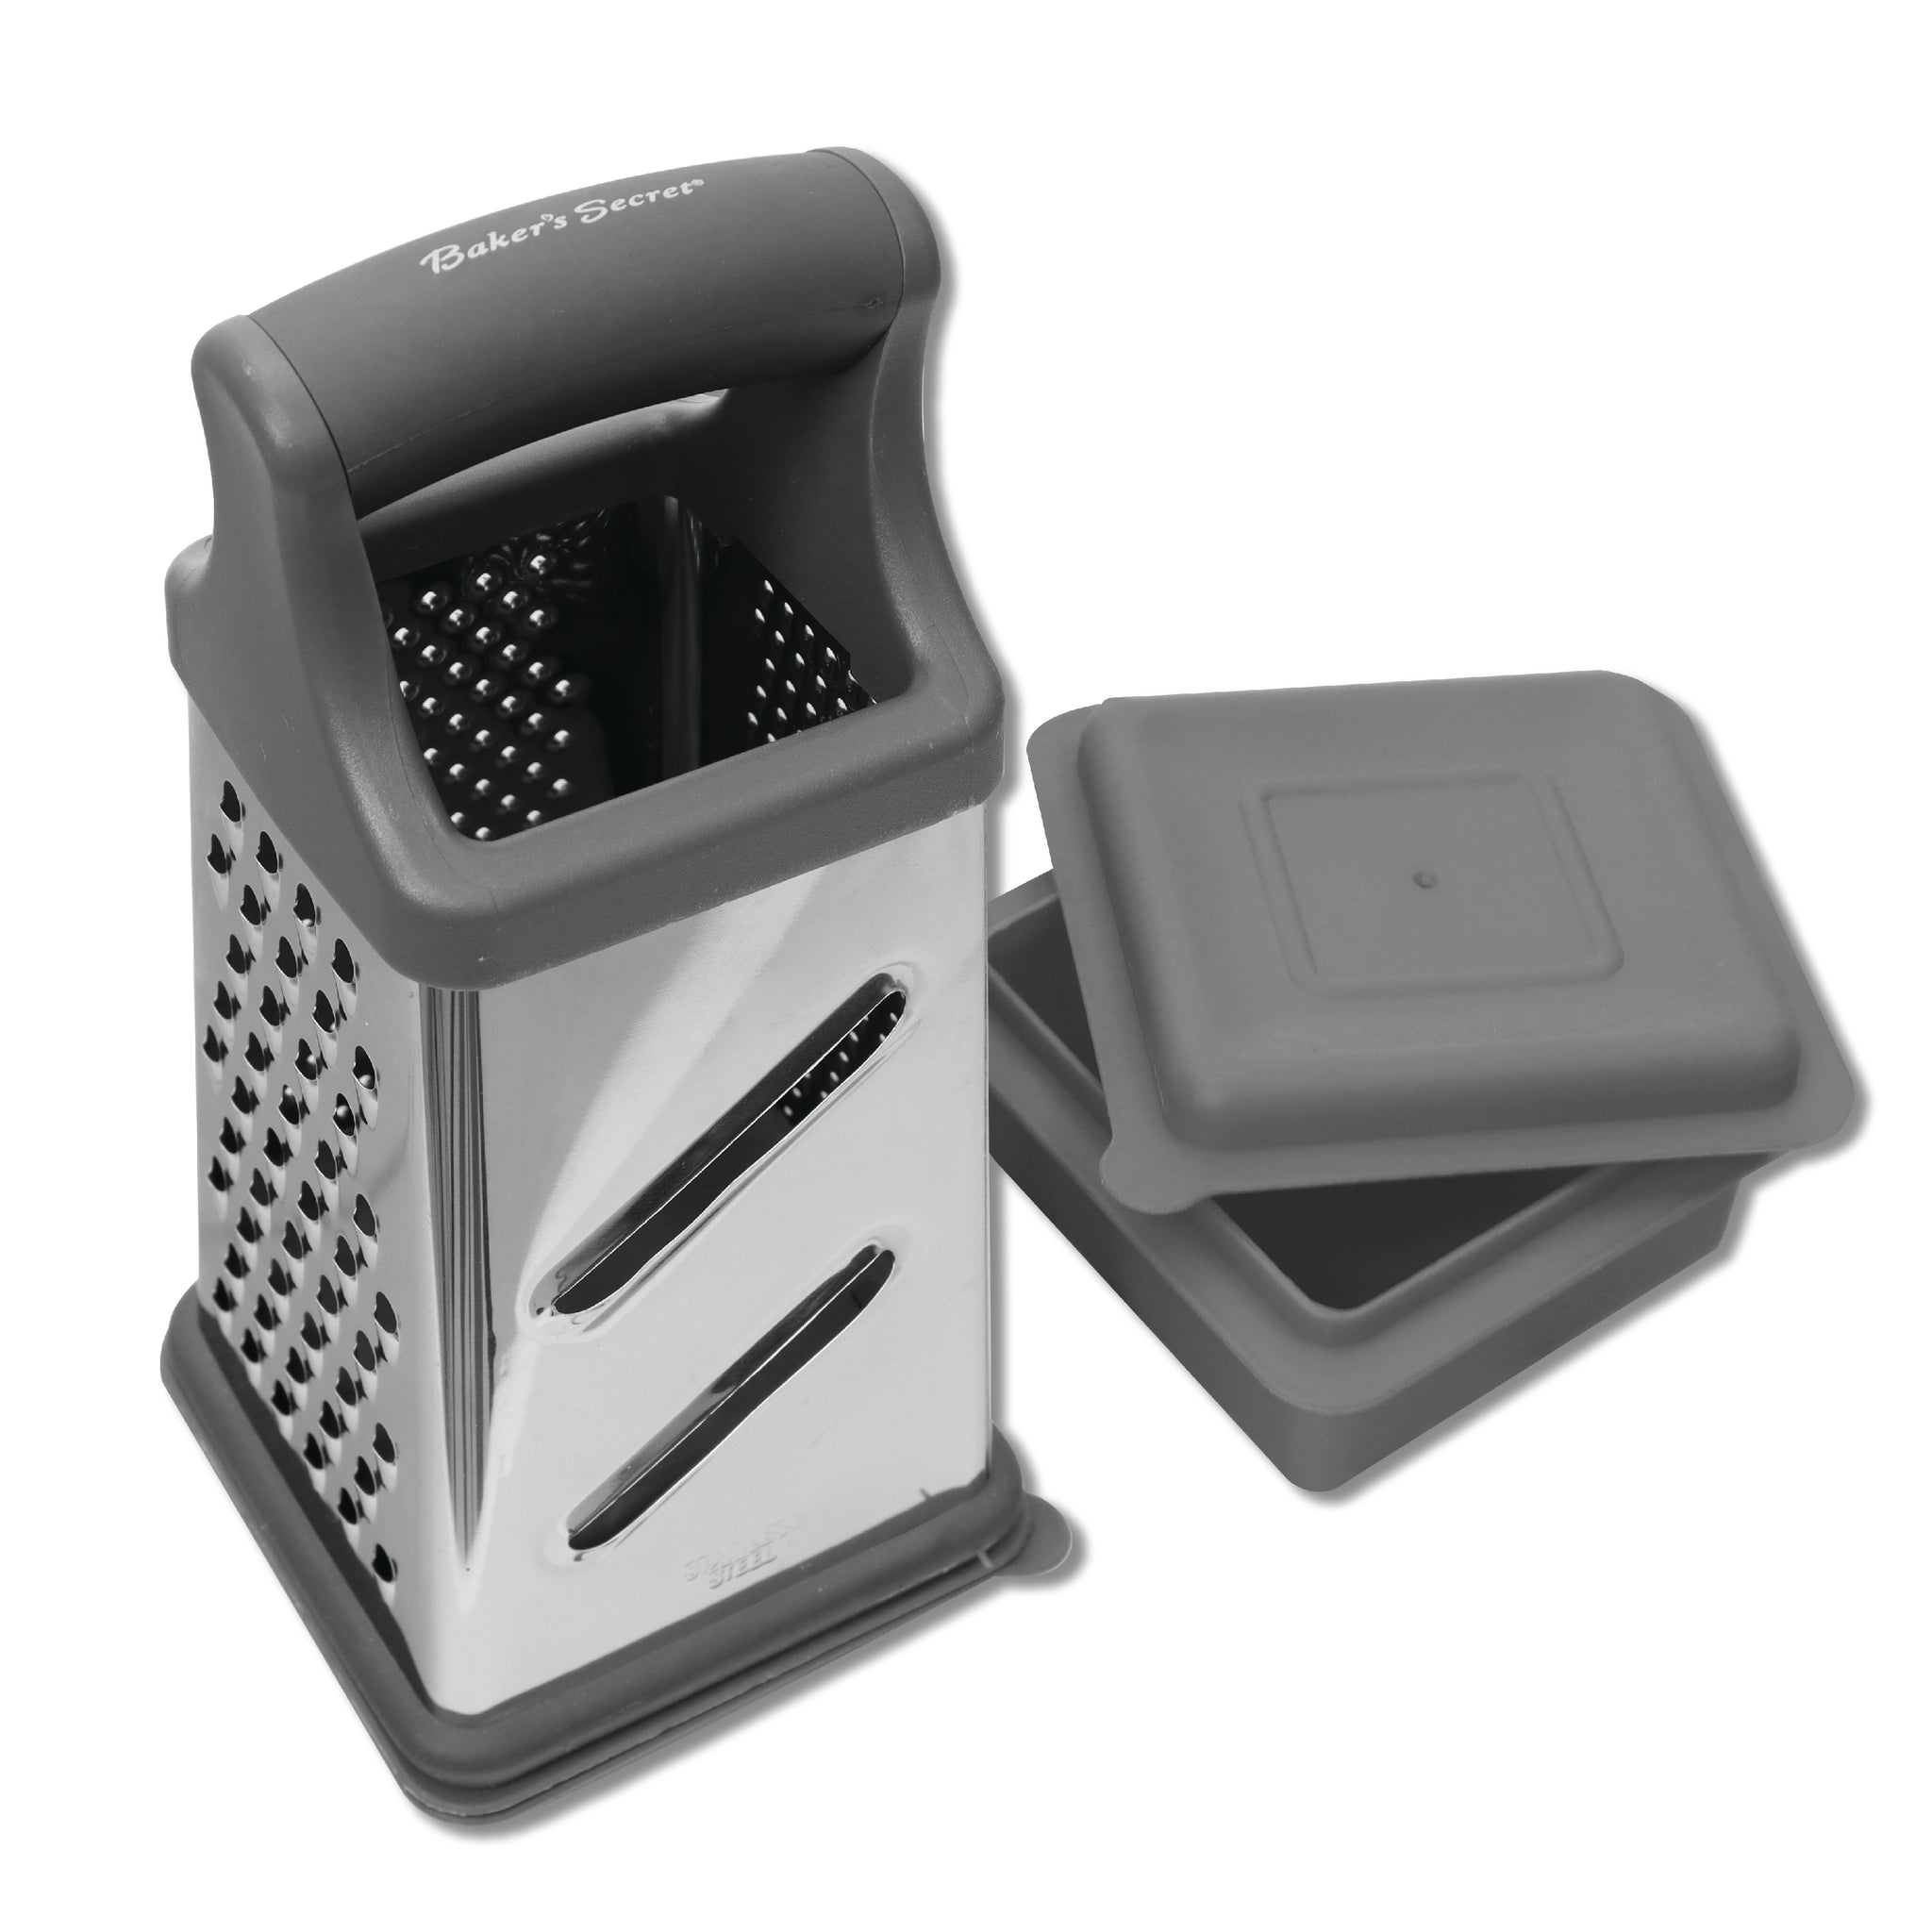 Stainless Steel Box Grater with Container Black Cookware Accessories - Baker's Secret